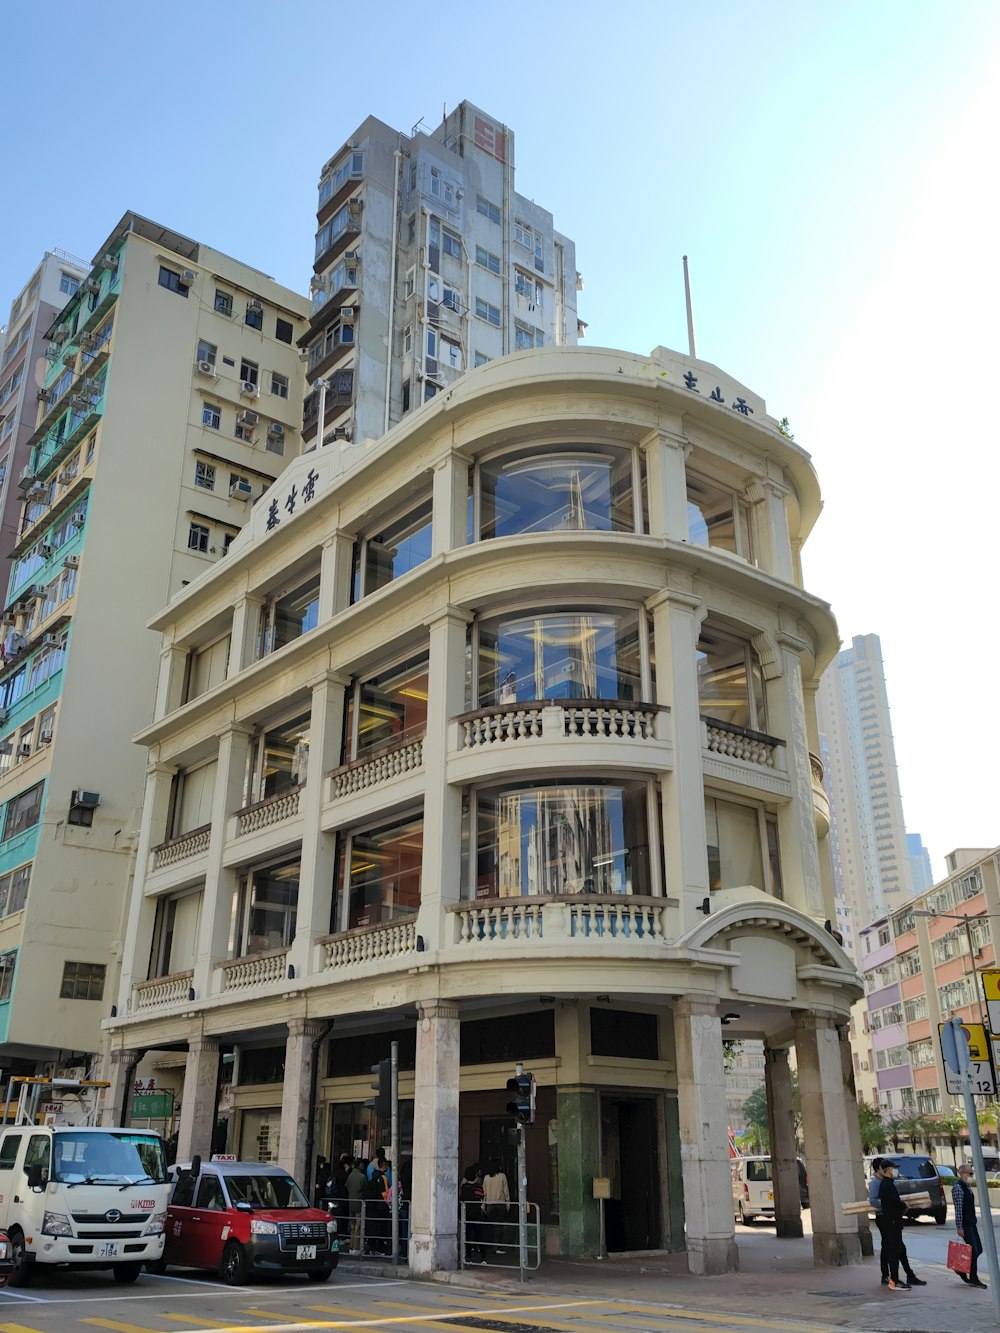 a tall building with balconies and balconies on the top of it